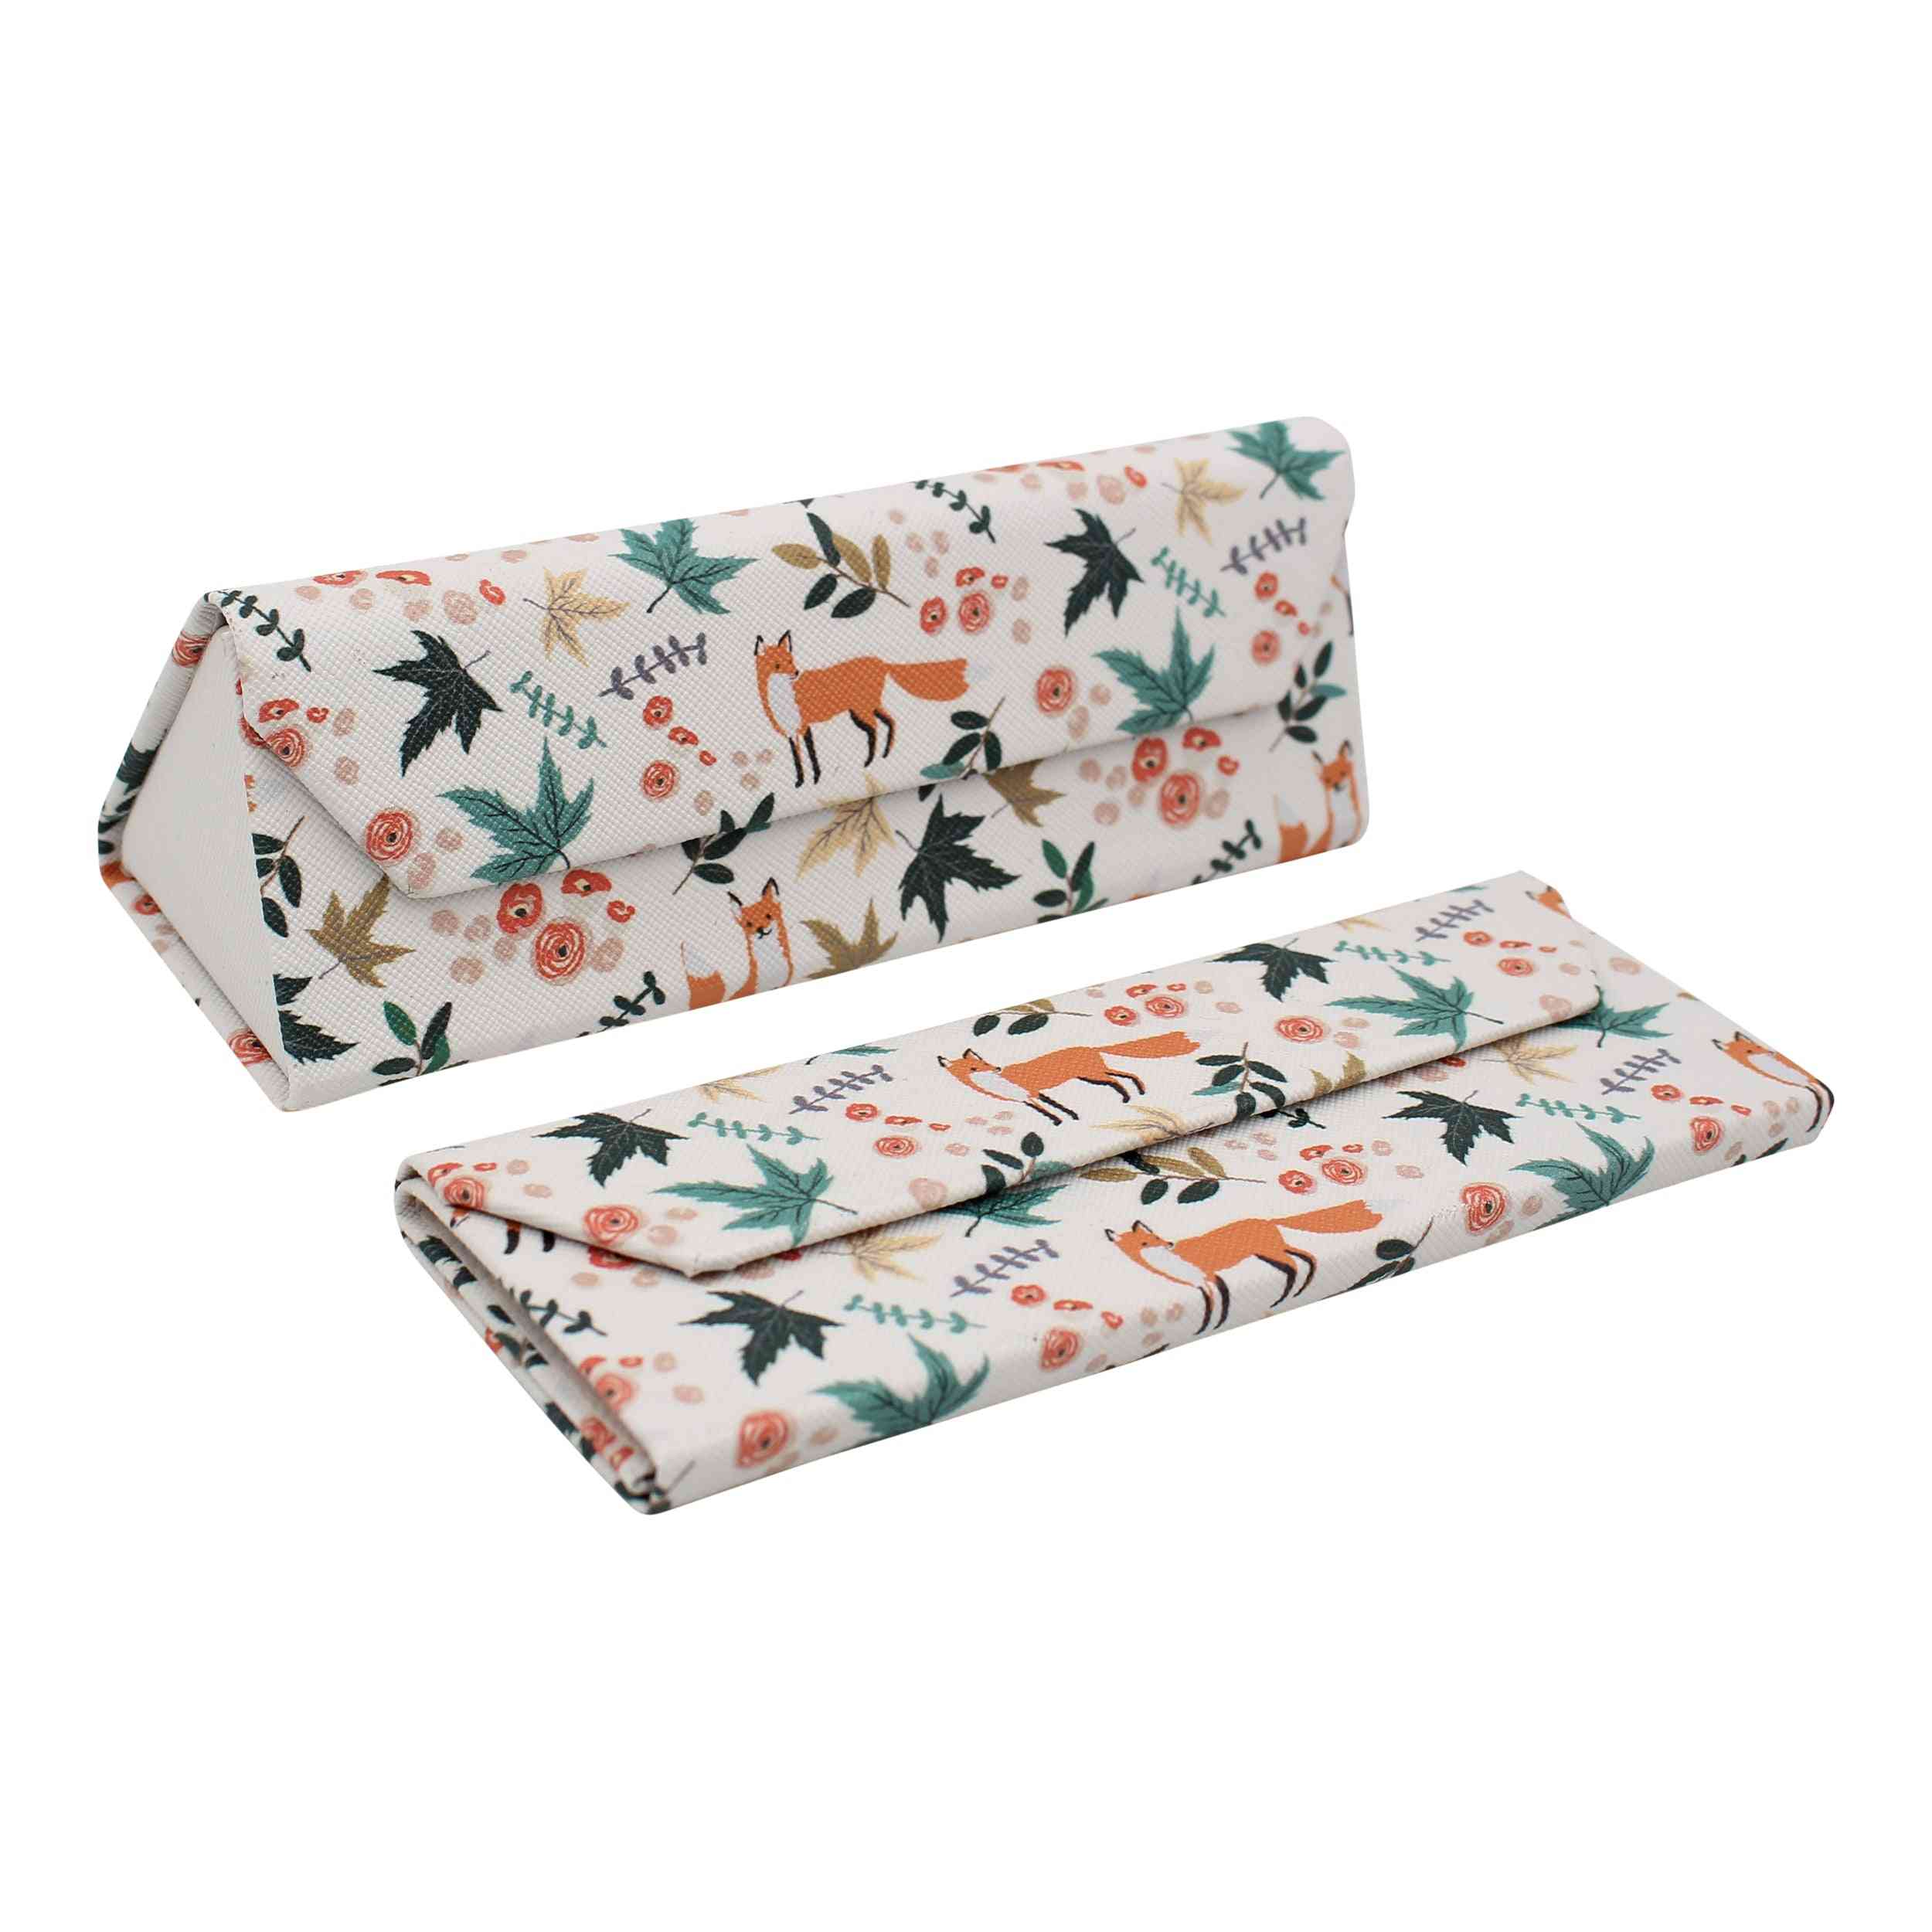 Pu Leather Glasses Case - Foxes Print (small)